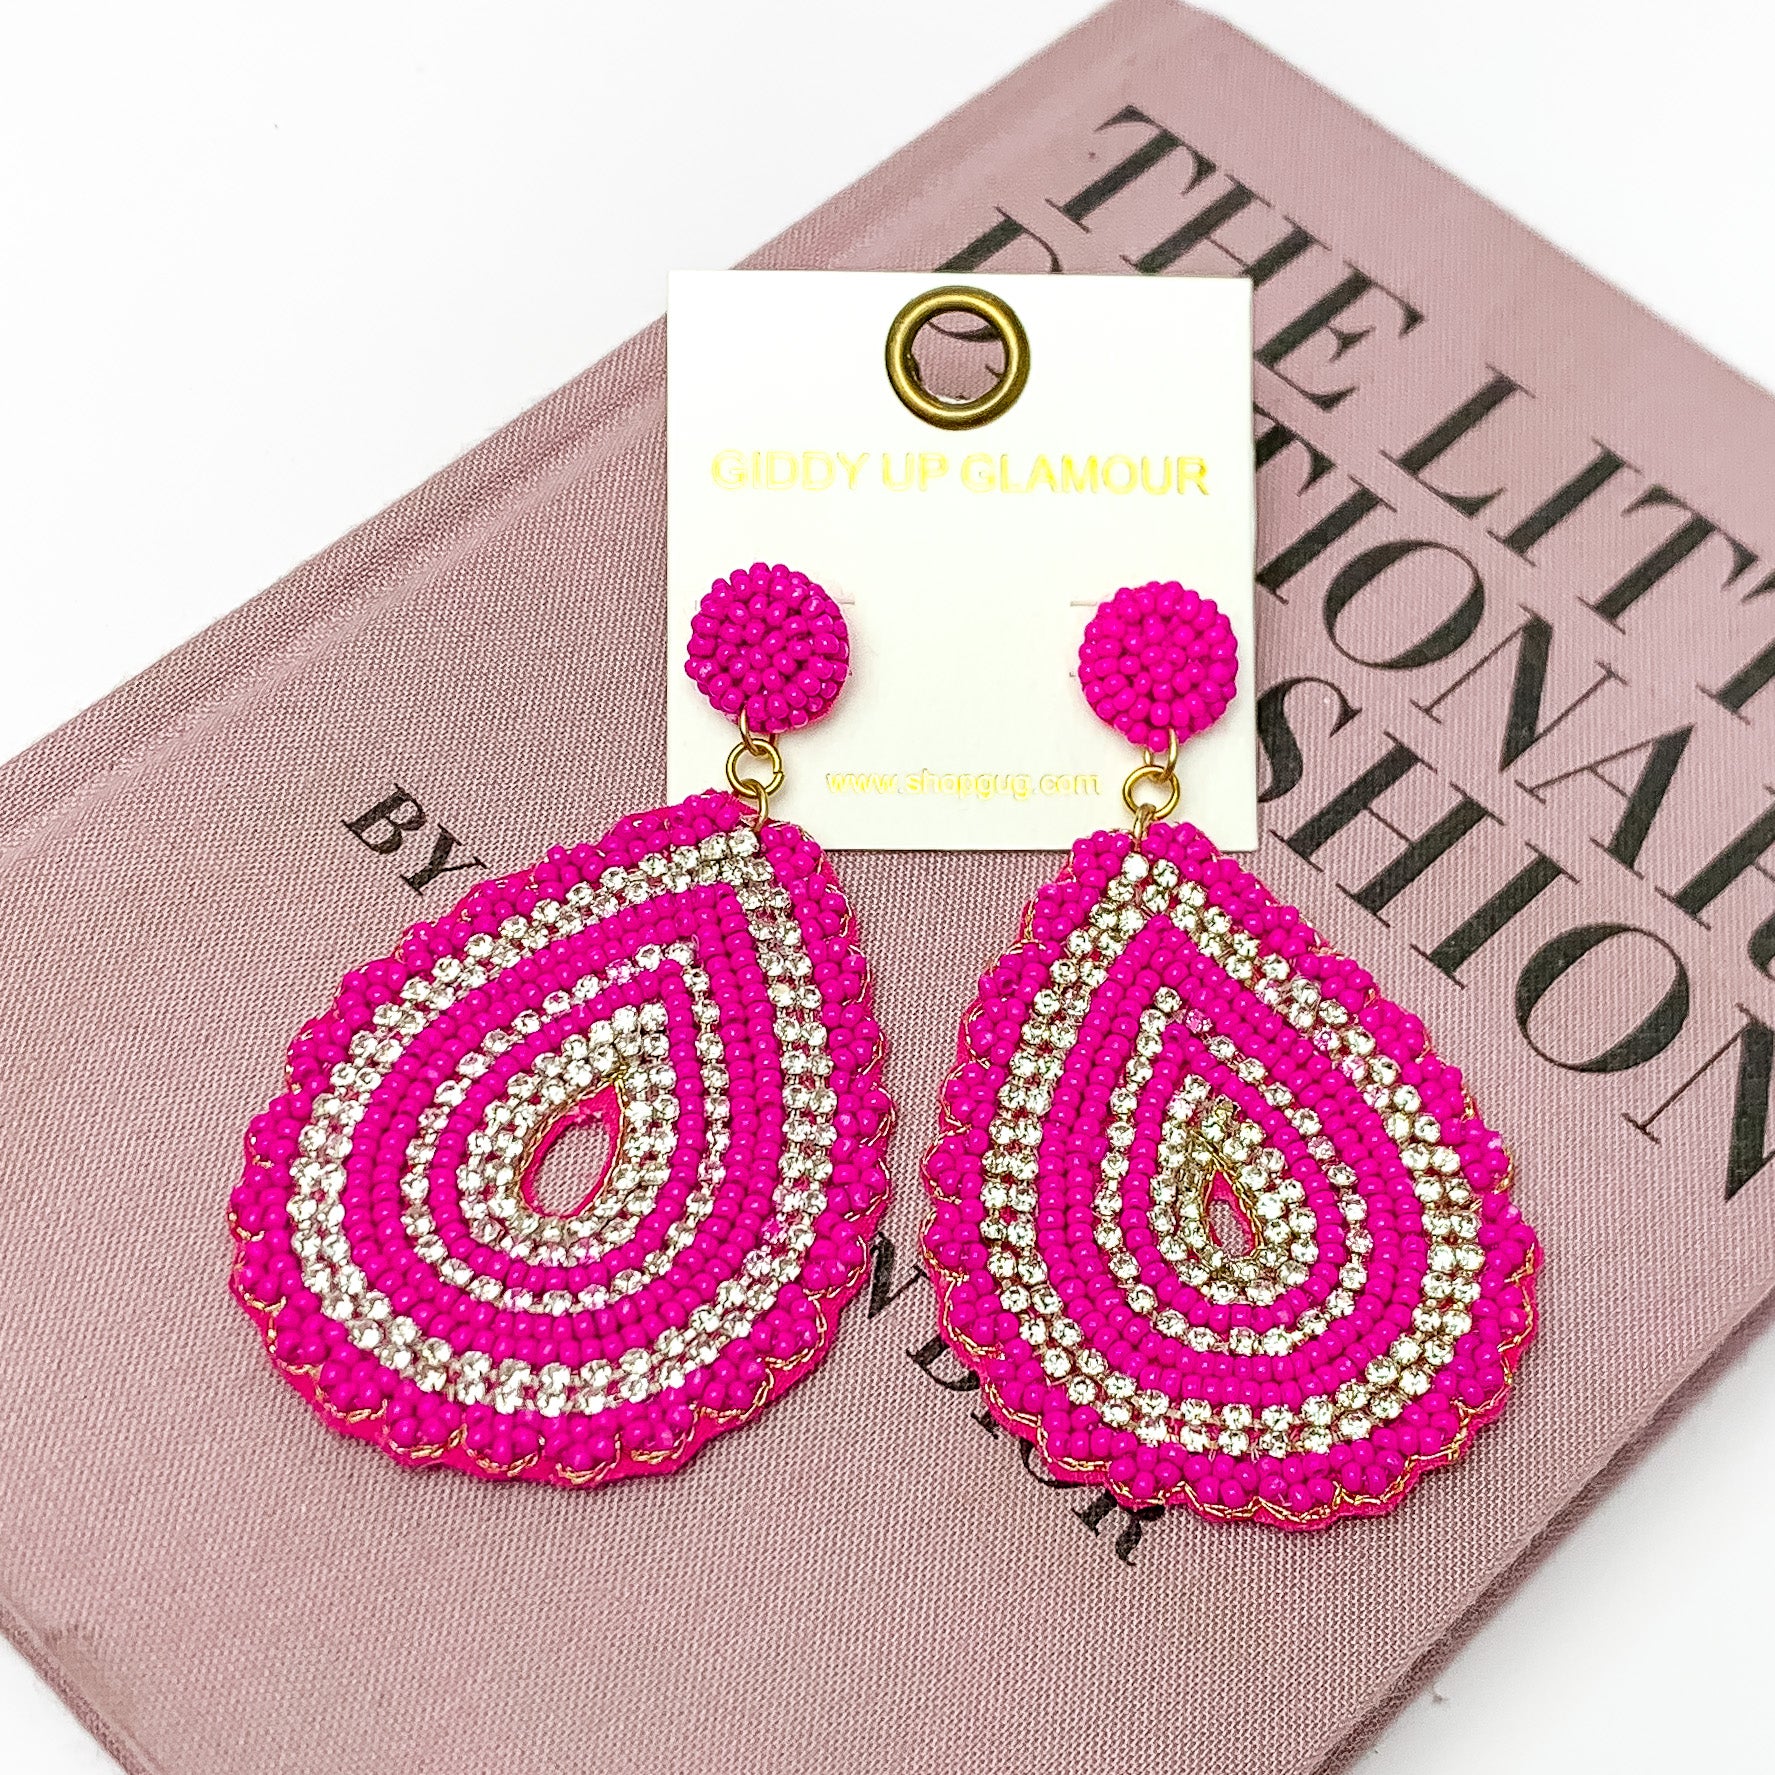 Sound Wave Beaded Drop Earrings with Clear Crystals in Fuchsia. Pictured on a white background with a book behind it.